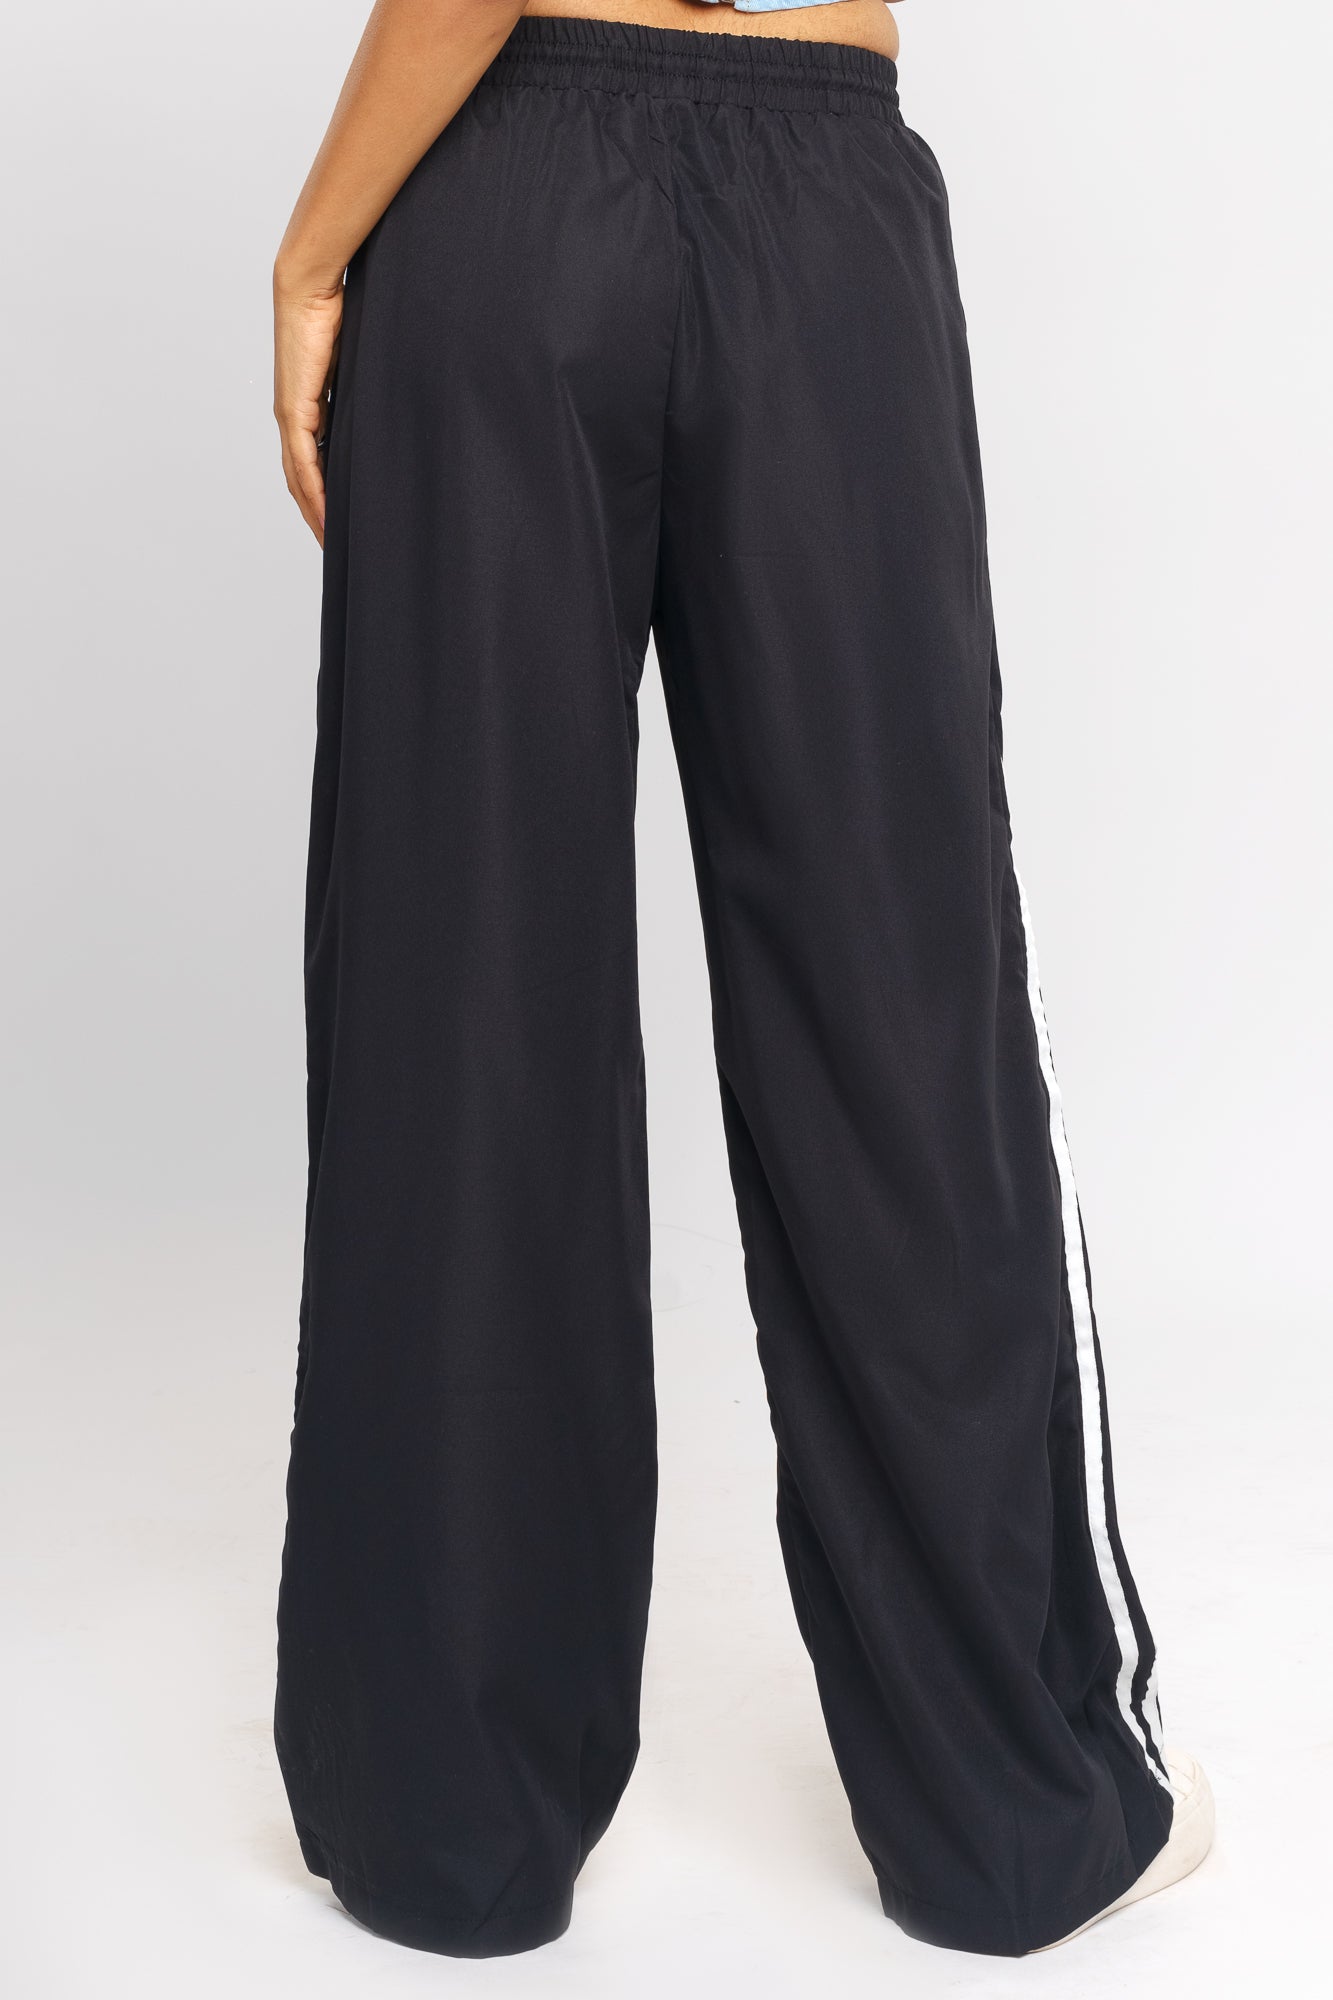 BLACK CONTRAST STRAIGHT FIT TRACK PANTS